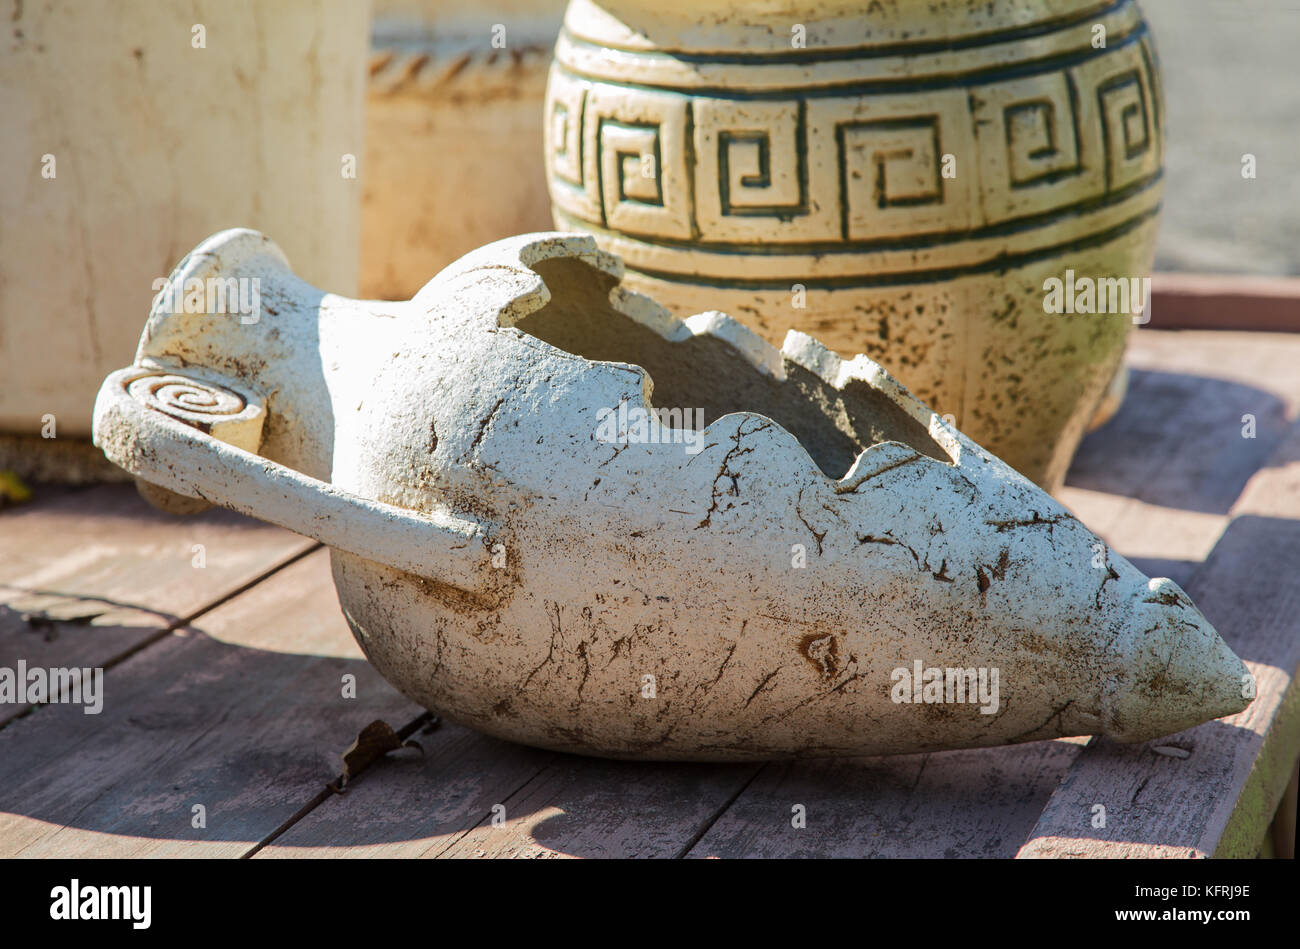 old clay jugs on a wooden table close-up Stock Photo